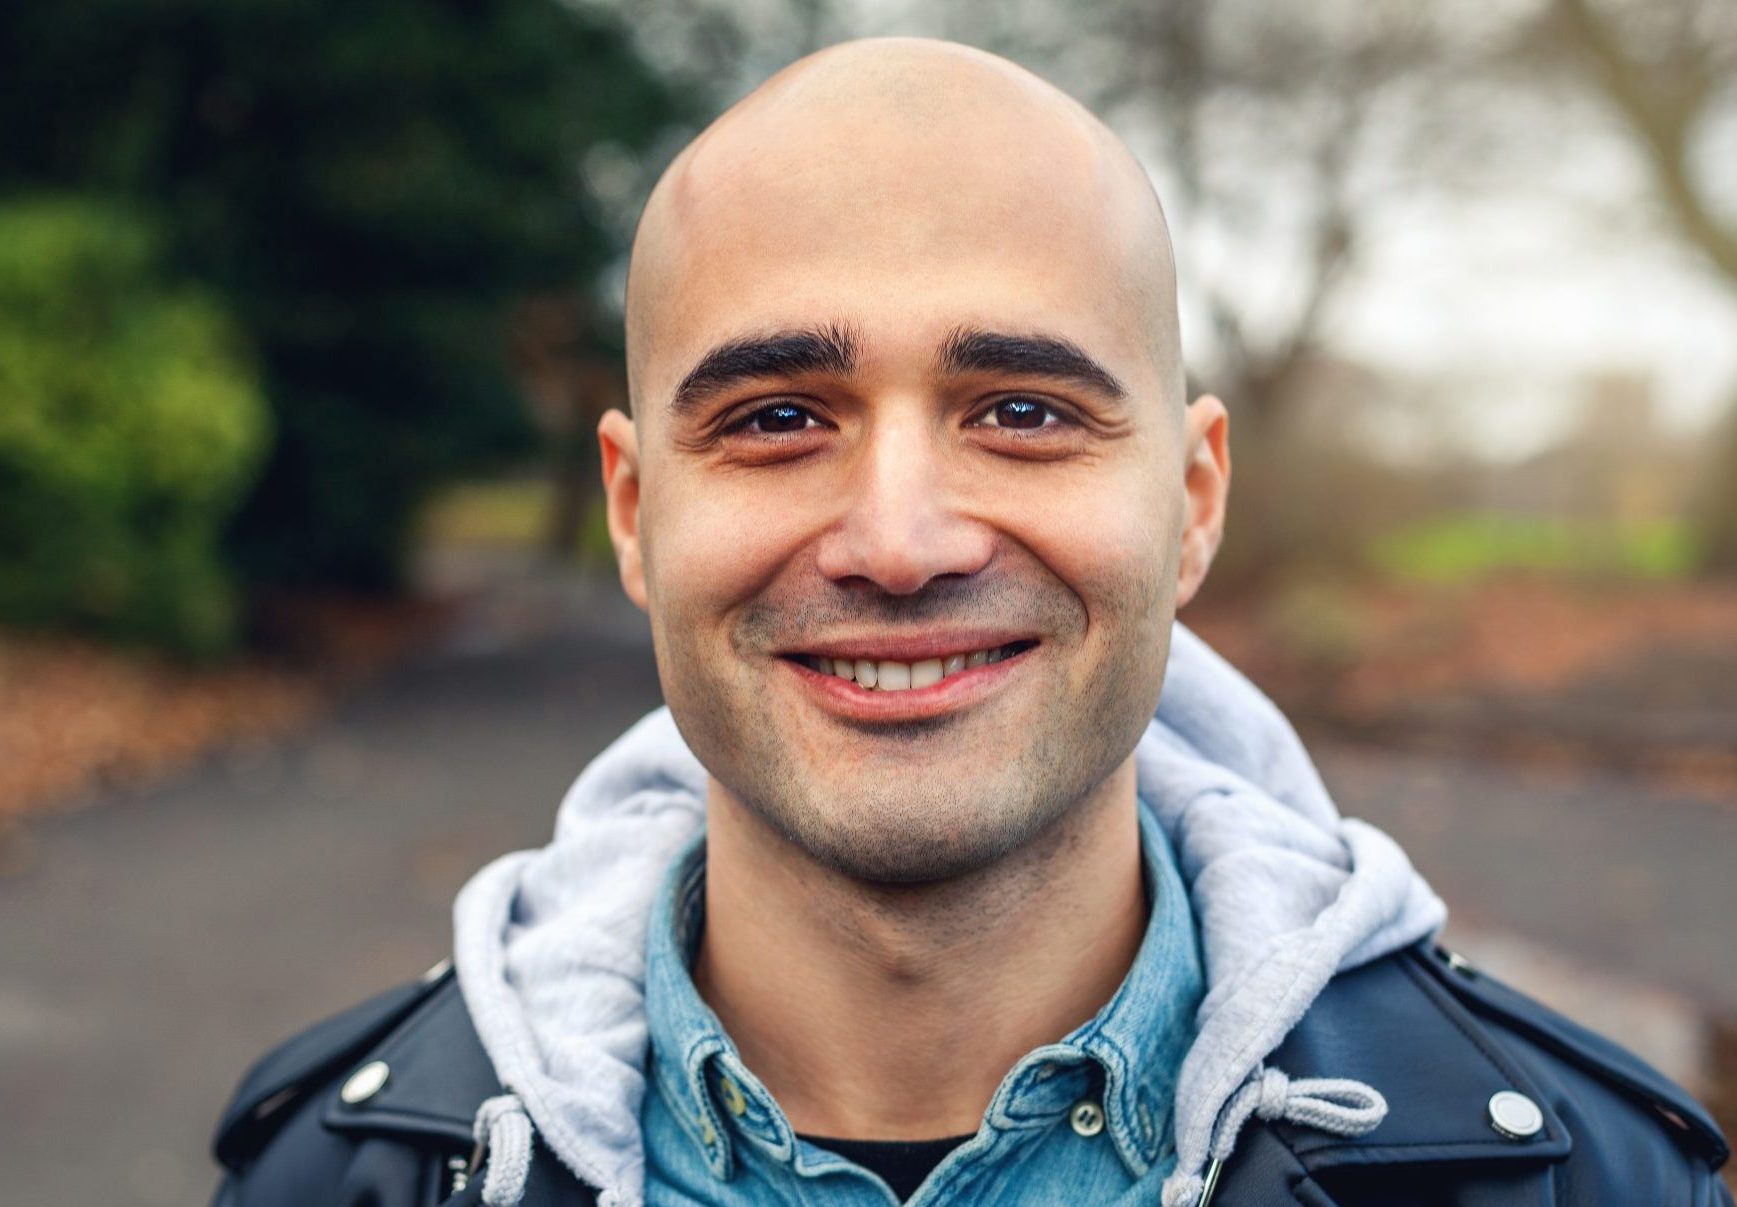 Young man who is bald, smiling directly at the camera. He is standing in a park with tree's behind him.